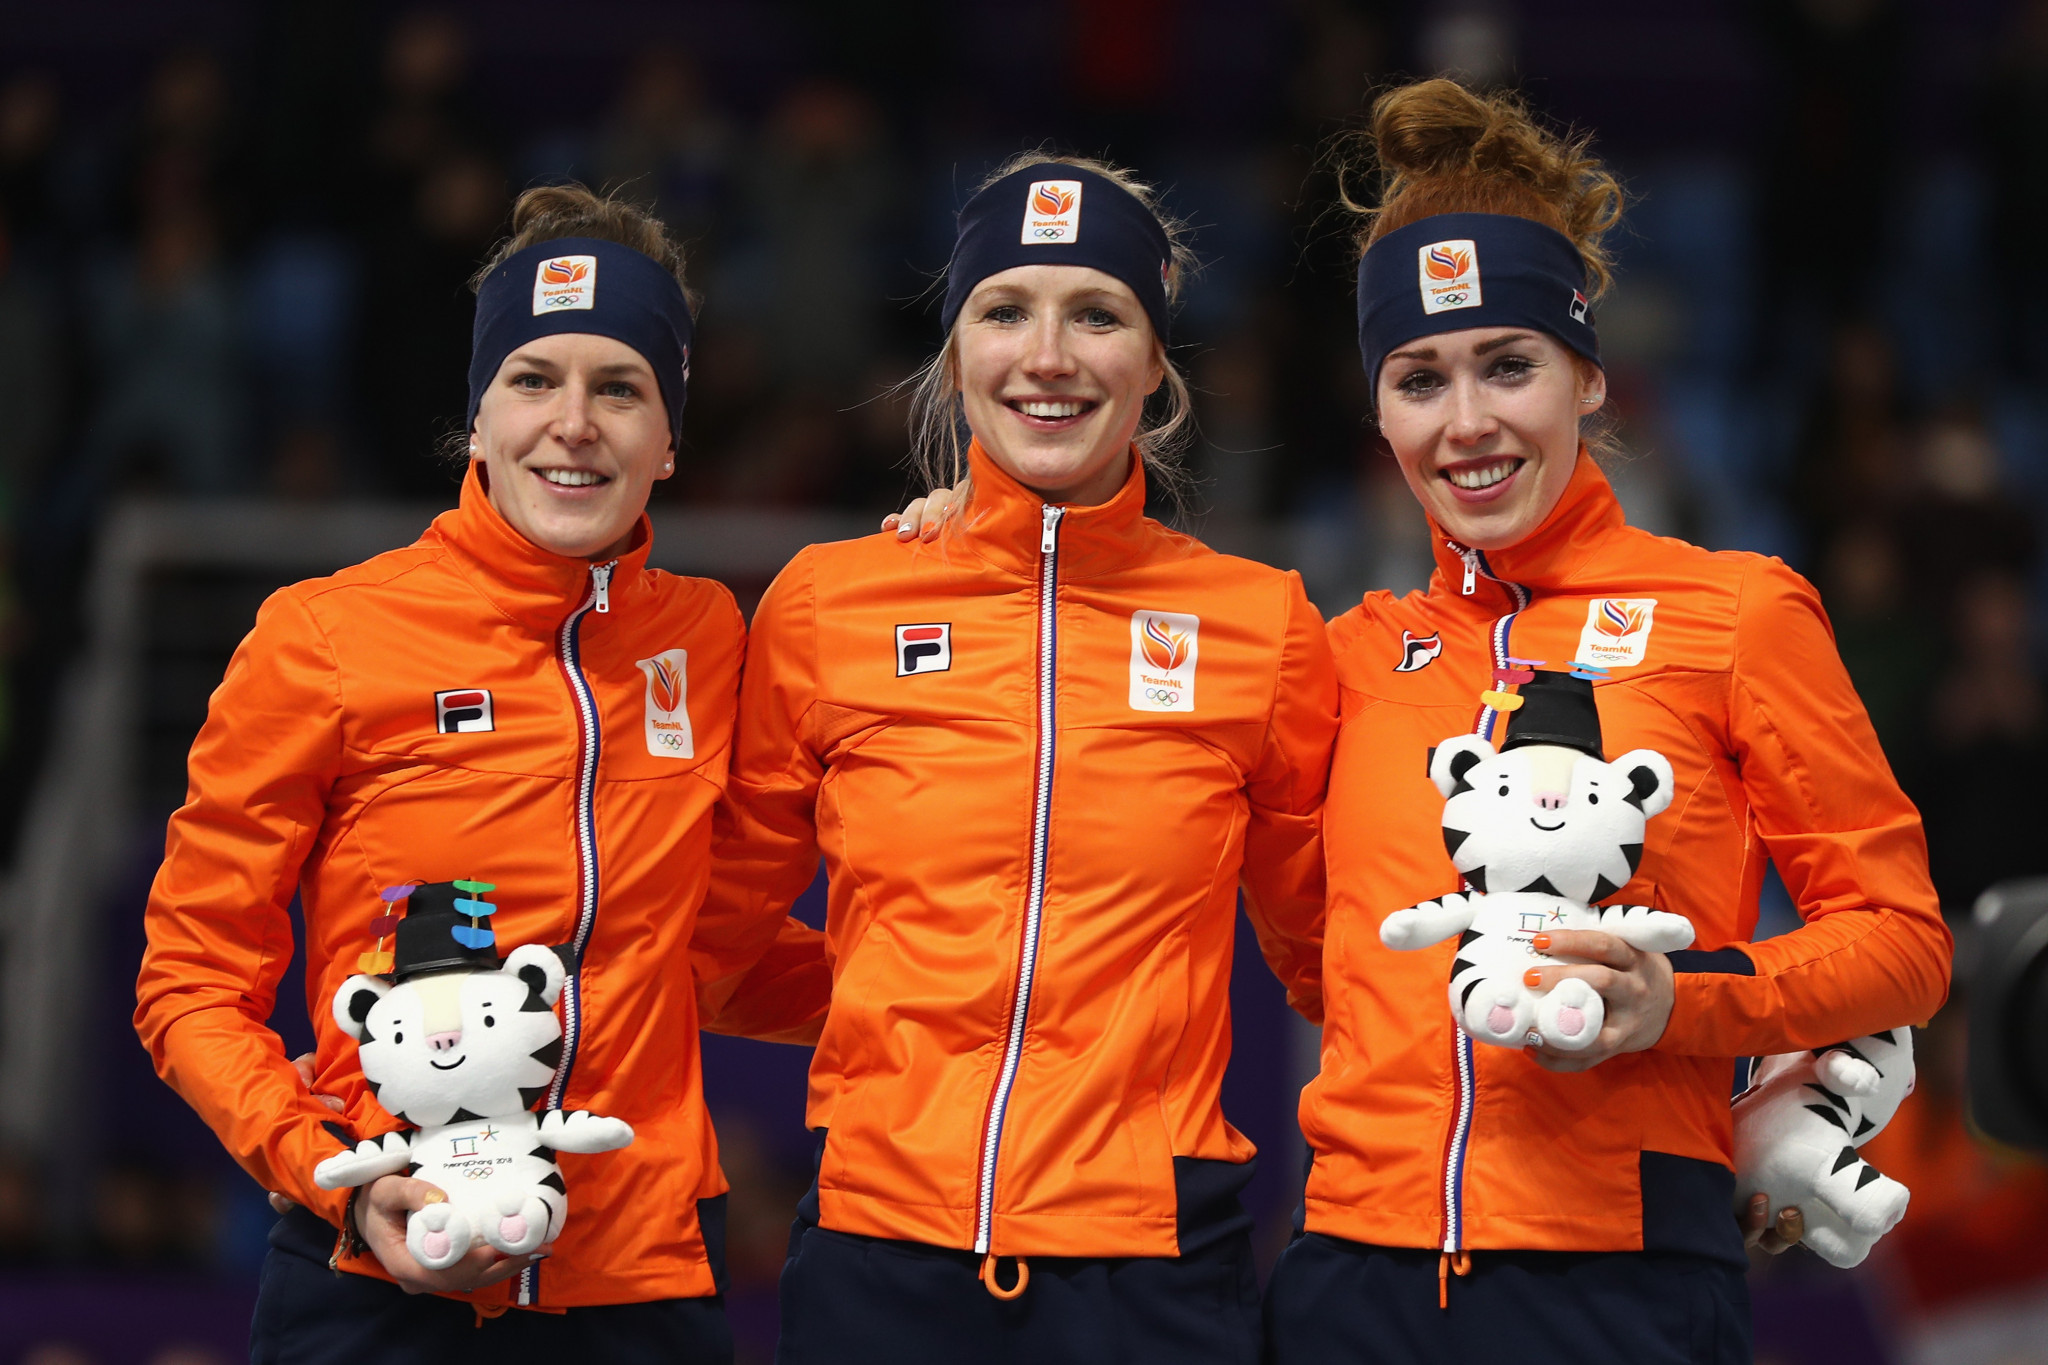 Speed skating at Pyeongchang 2018 opened with a Dutch cleansweep ©Getty Images